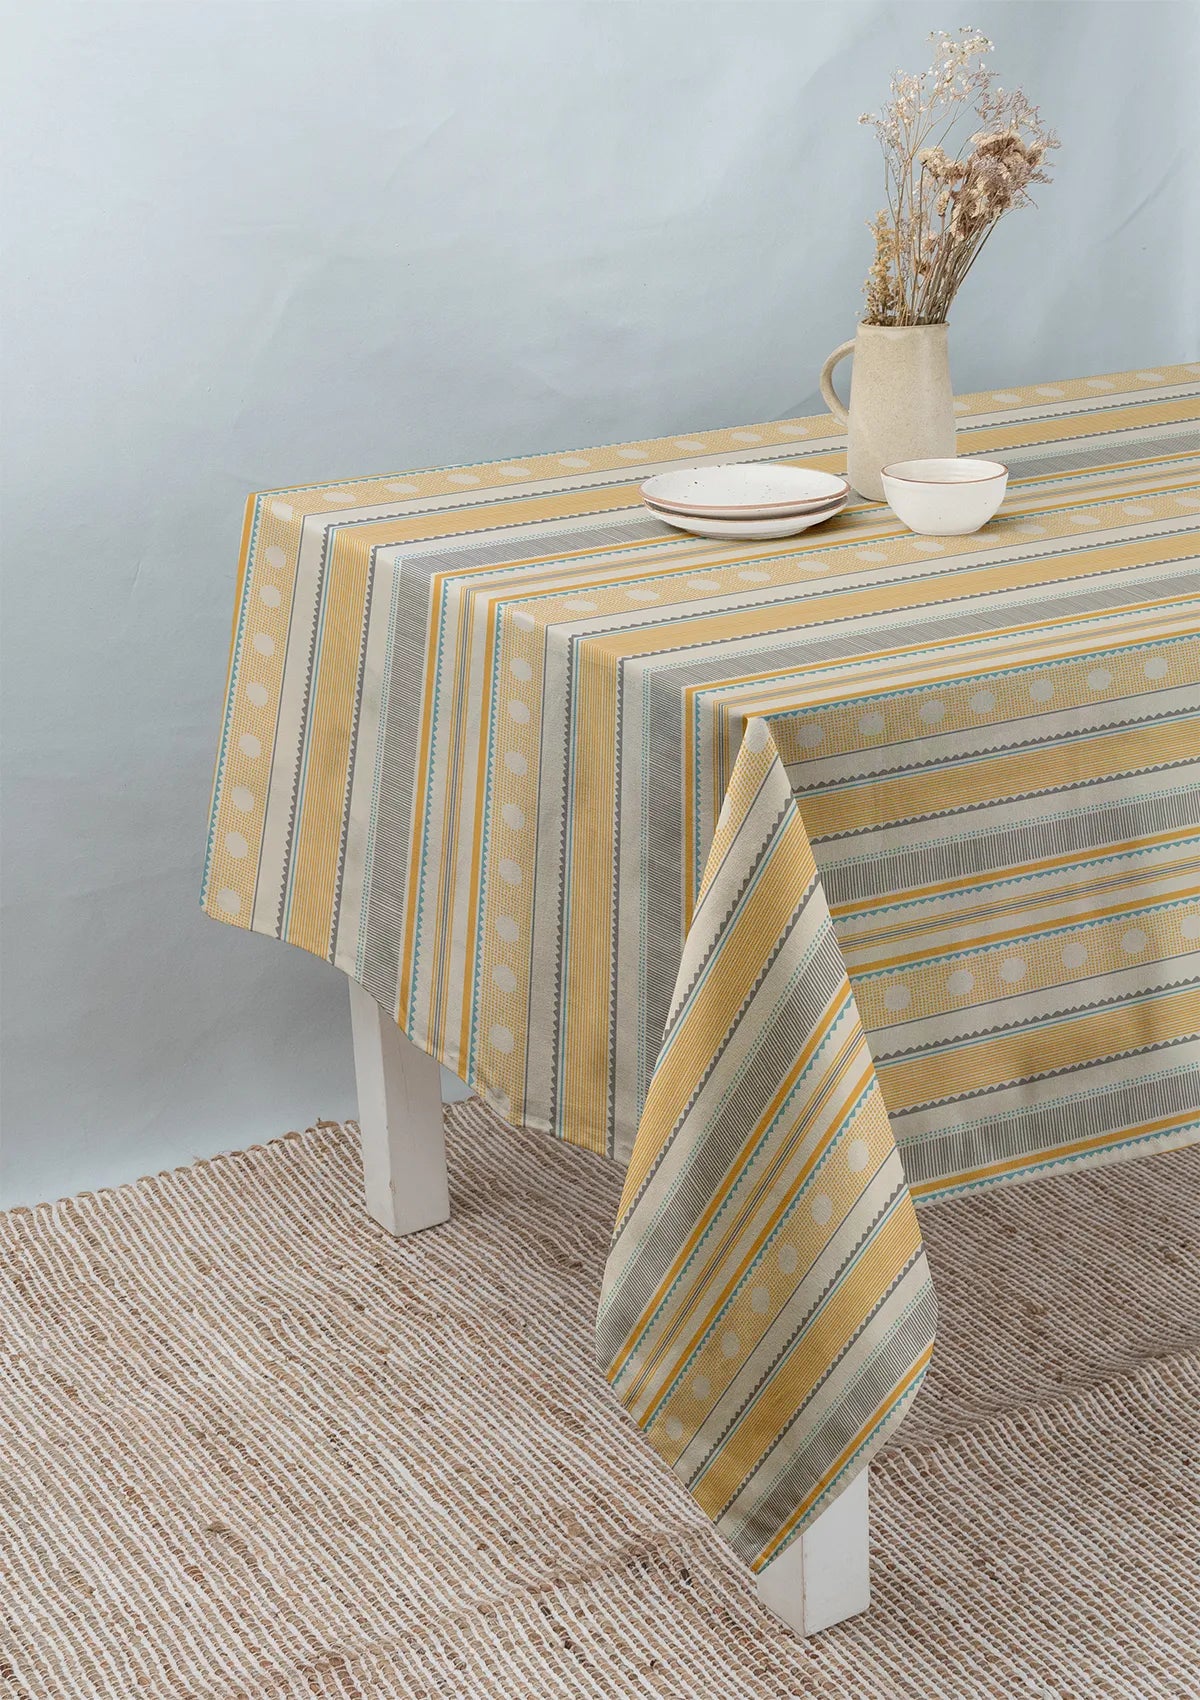 Buru 100% cotton boho table cloth for 4 seater or 6 seater dining - Mustard